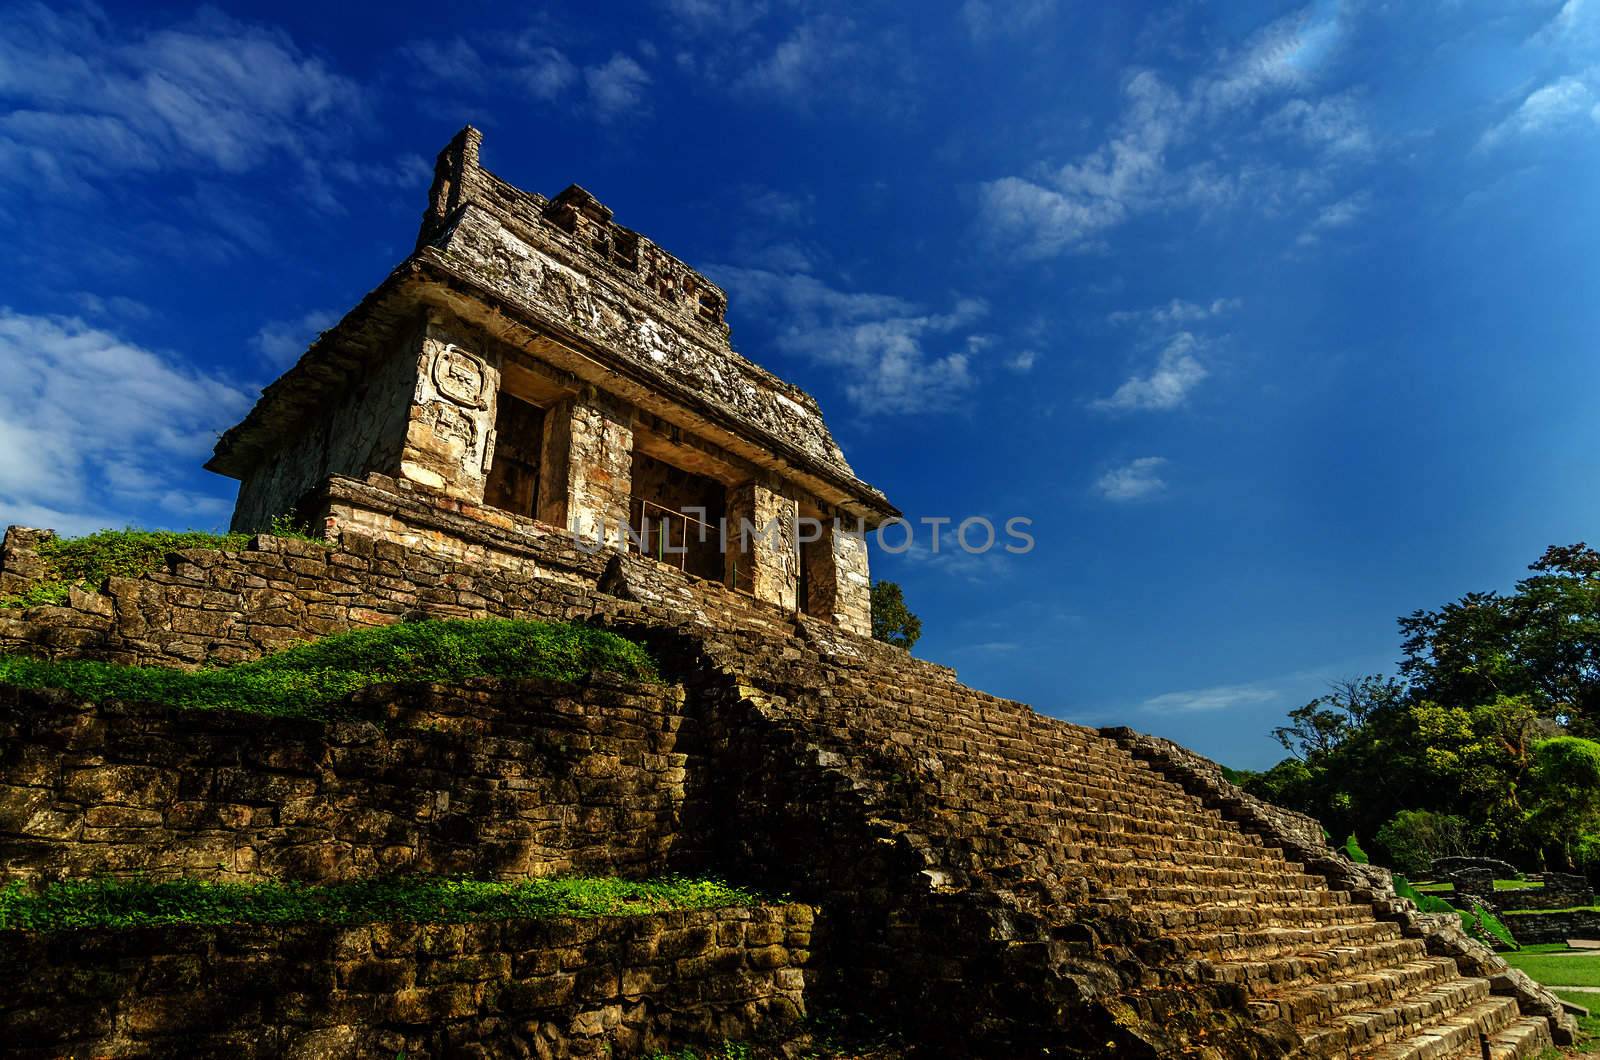 Temple in ancient Mayan city of Palenque with a beautiful blue sky